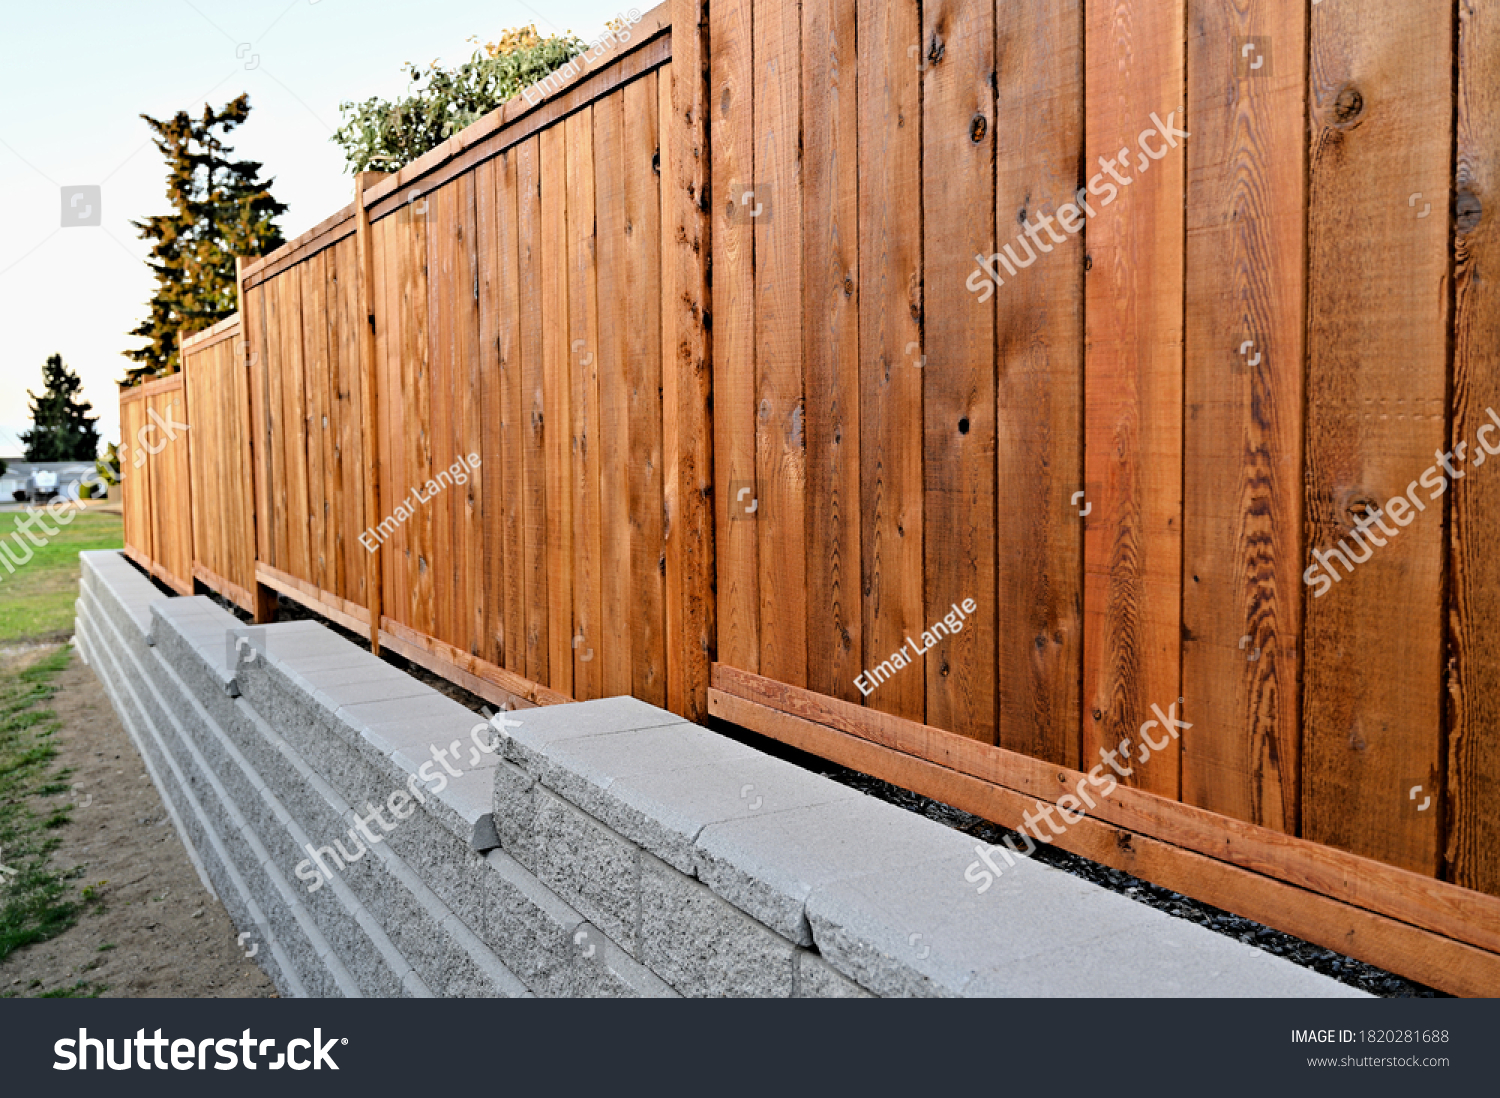 Staggered retaining block wall, cement blocks, new construction, wooden fence, panel fence,  residential property,  #1820281688